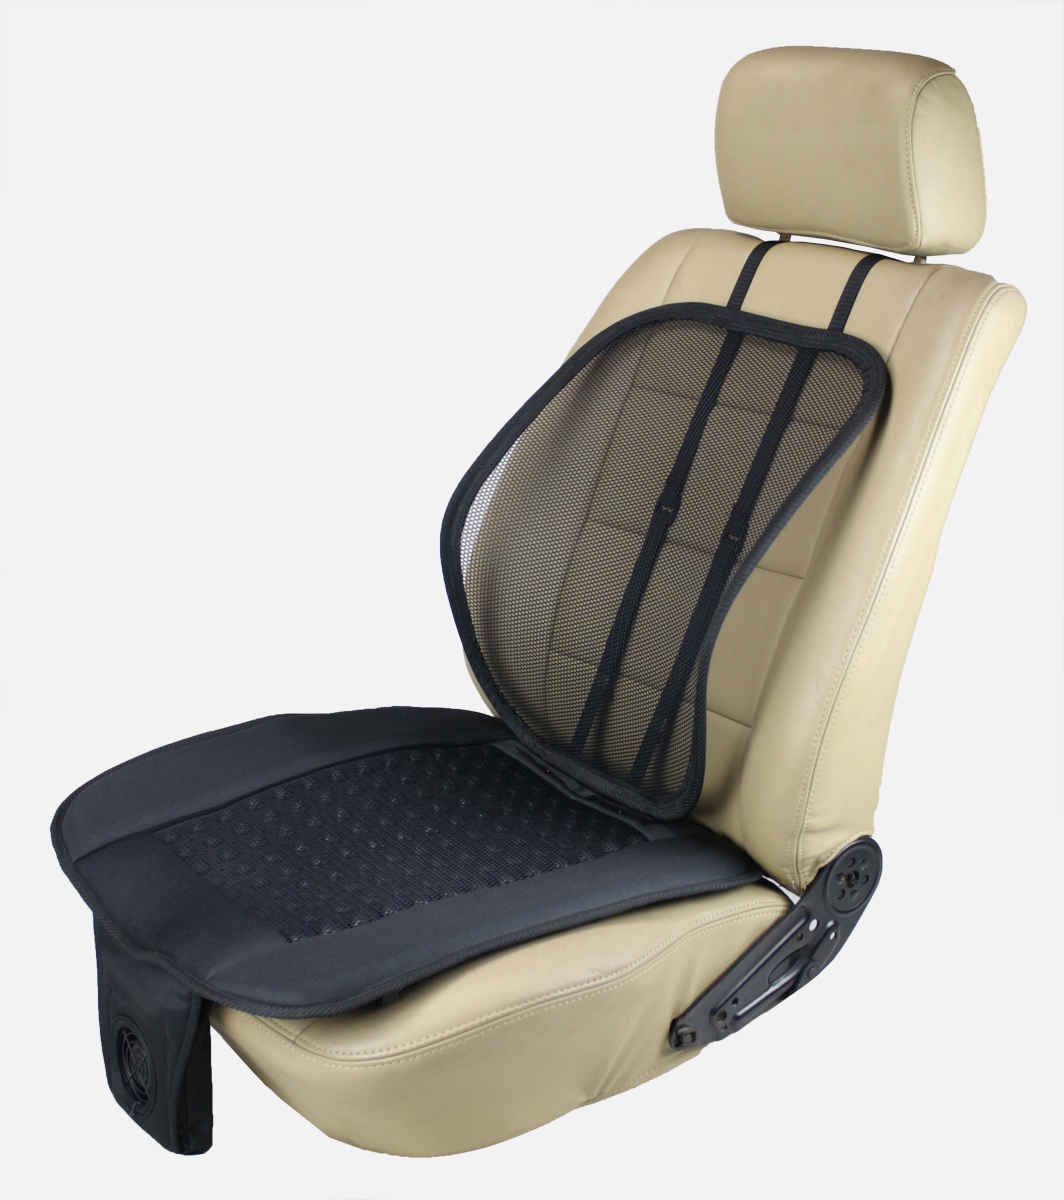 SA-4270T 24V AeroSeat, Cooling Ventilated Seat Cushion Air Flow with  Adjustable Lumbar Mesh Support Car Seat Fan Cushion - Obbomed® Webshop  United States